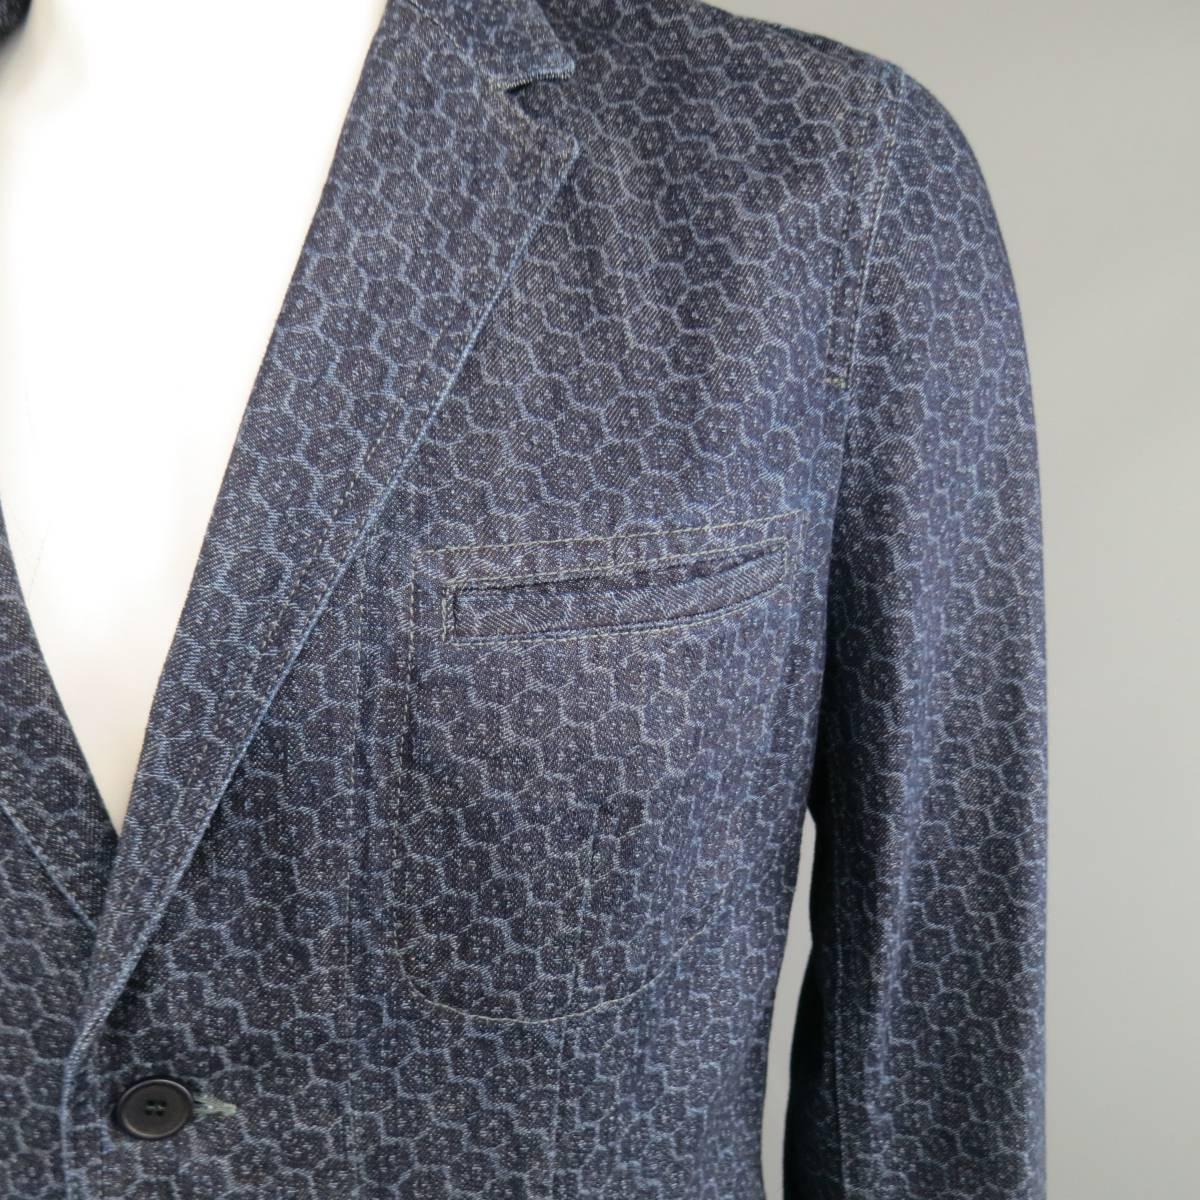 BOTTEGA VENETA sport coat in a navy indigo blue printed denim with a two button closure, notch lapel and slit pockets. Made in Italy.
 
Excellent Pre-Owned Condition. Retails at $1995.00.
Marked: 54
 
Measurements:
 
Shoulder: 17.5 in.
Chest: 46